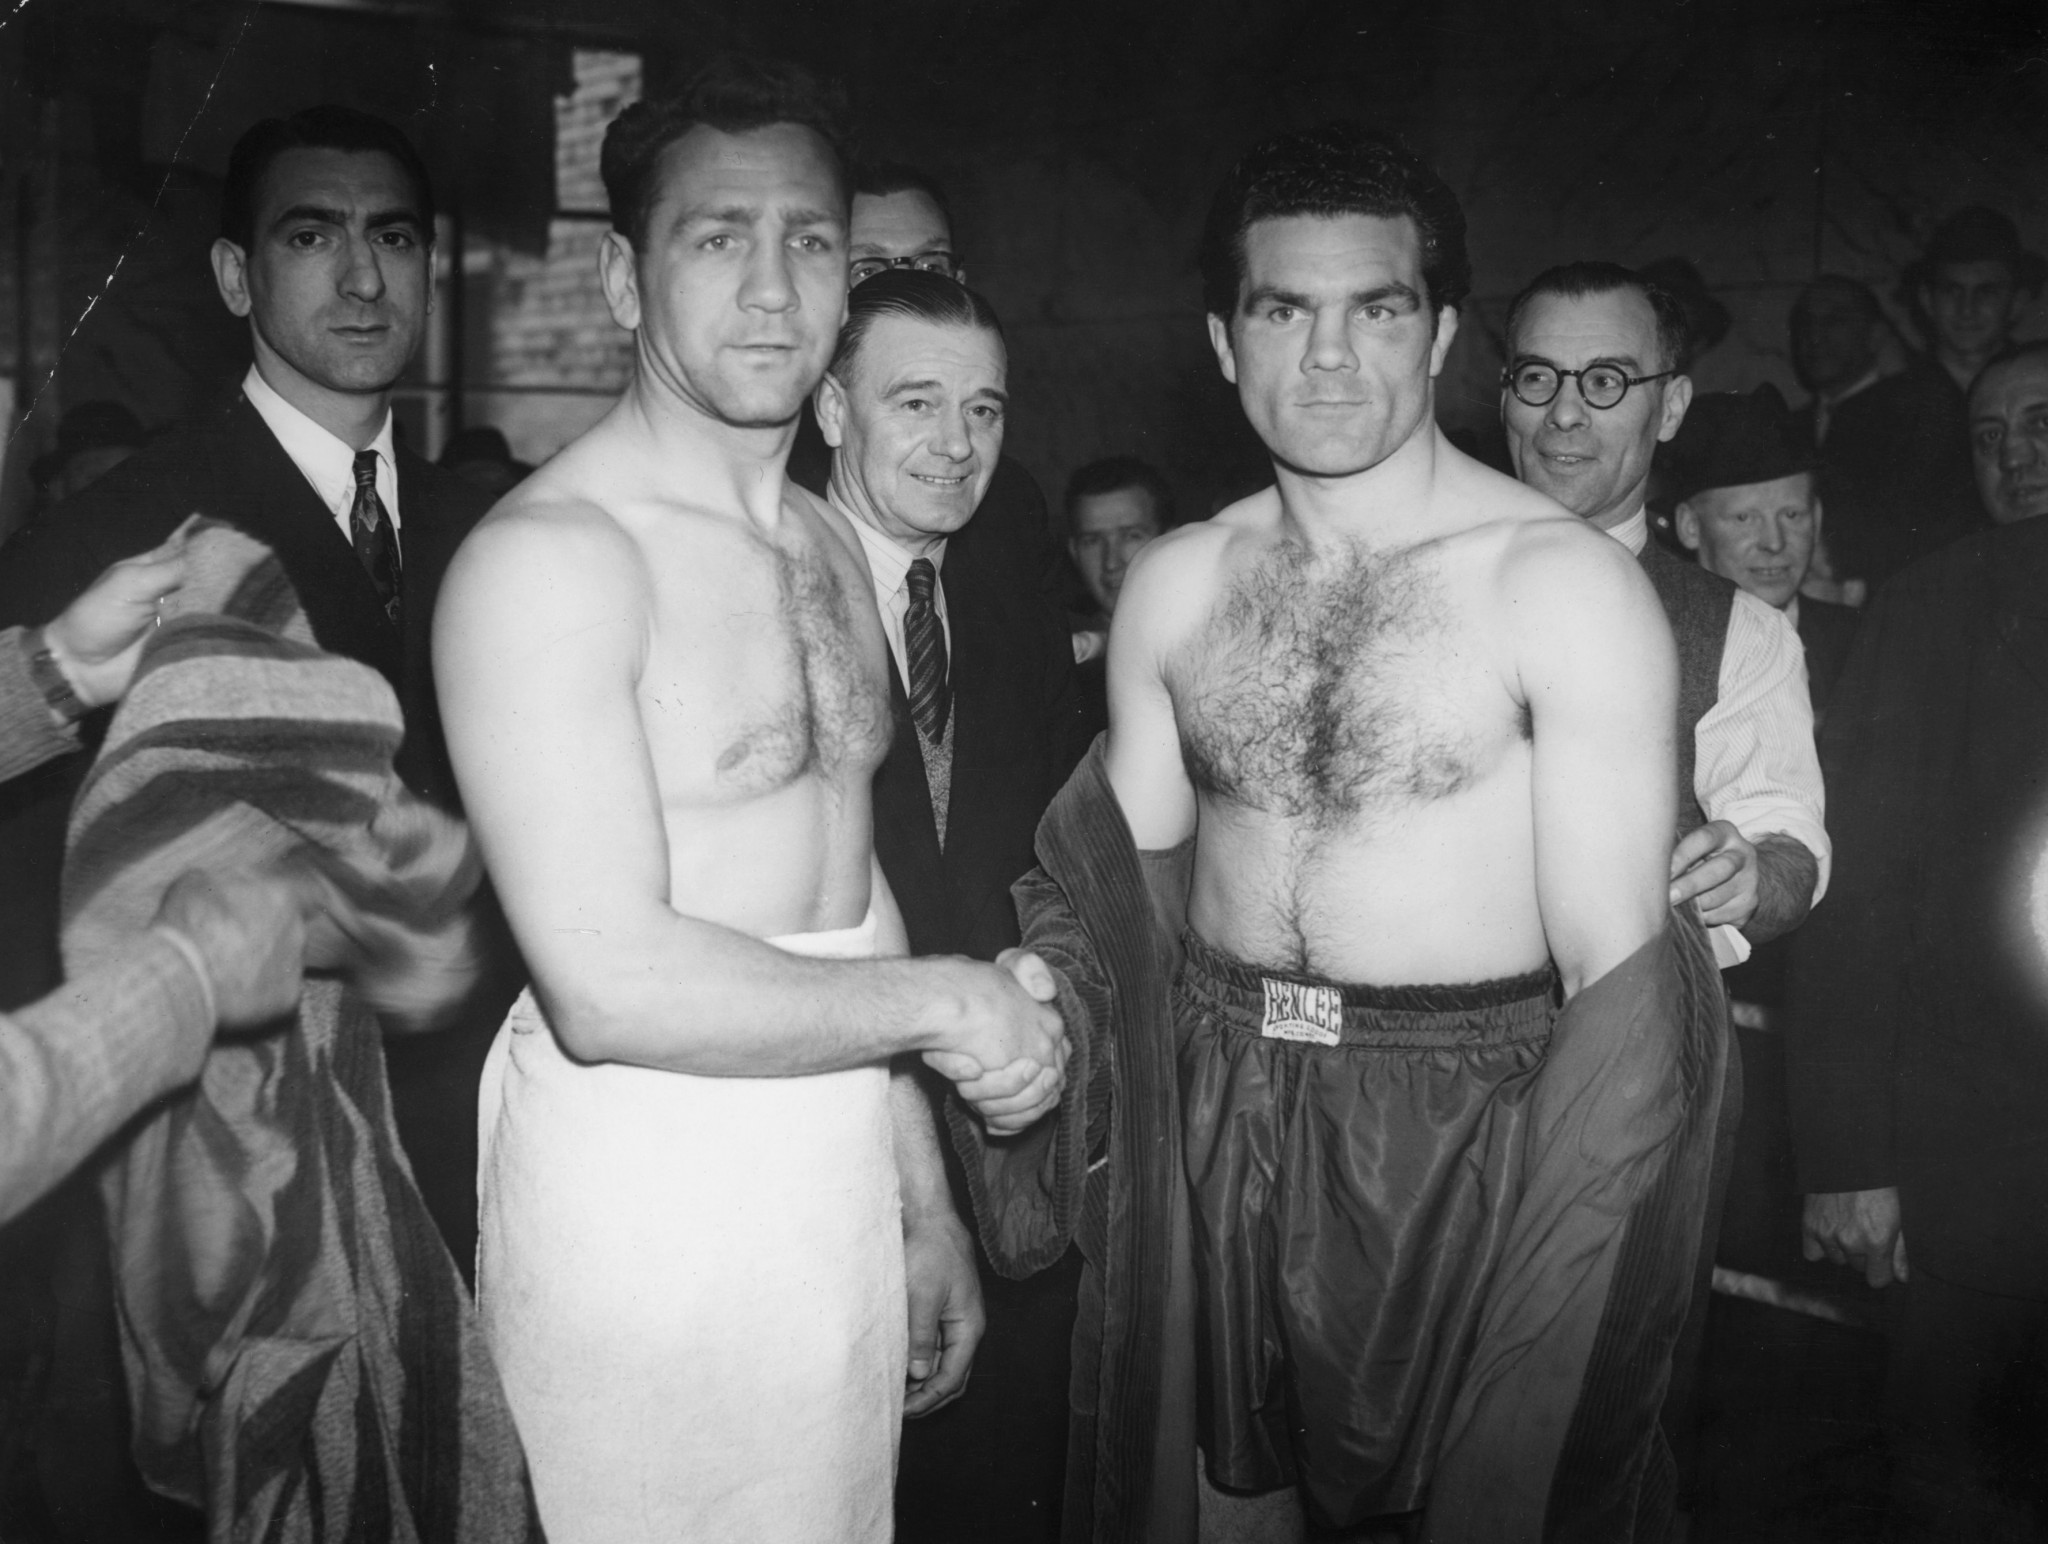 May 14, 1946: Russian-American boxer Gus Lesnevich, left, shakes hands with Britain's Freddie Mills at the weigh-in for their world light-heavyweight title fight in London ©Getty Images